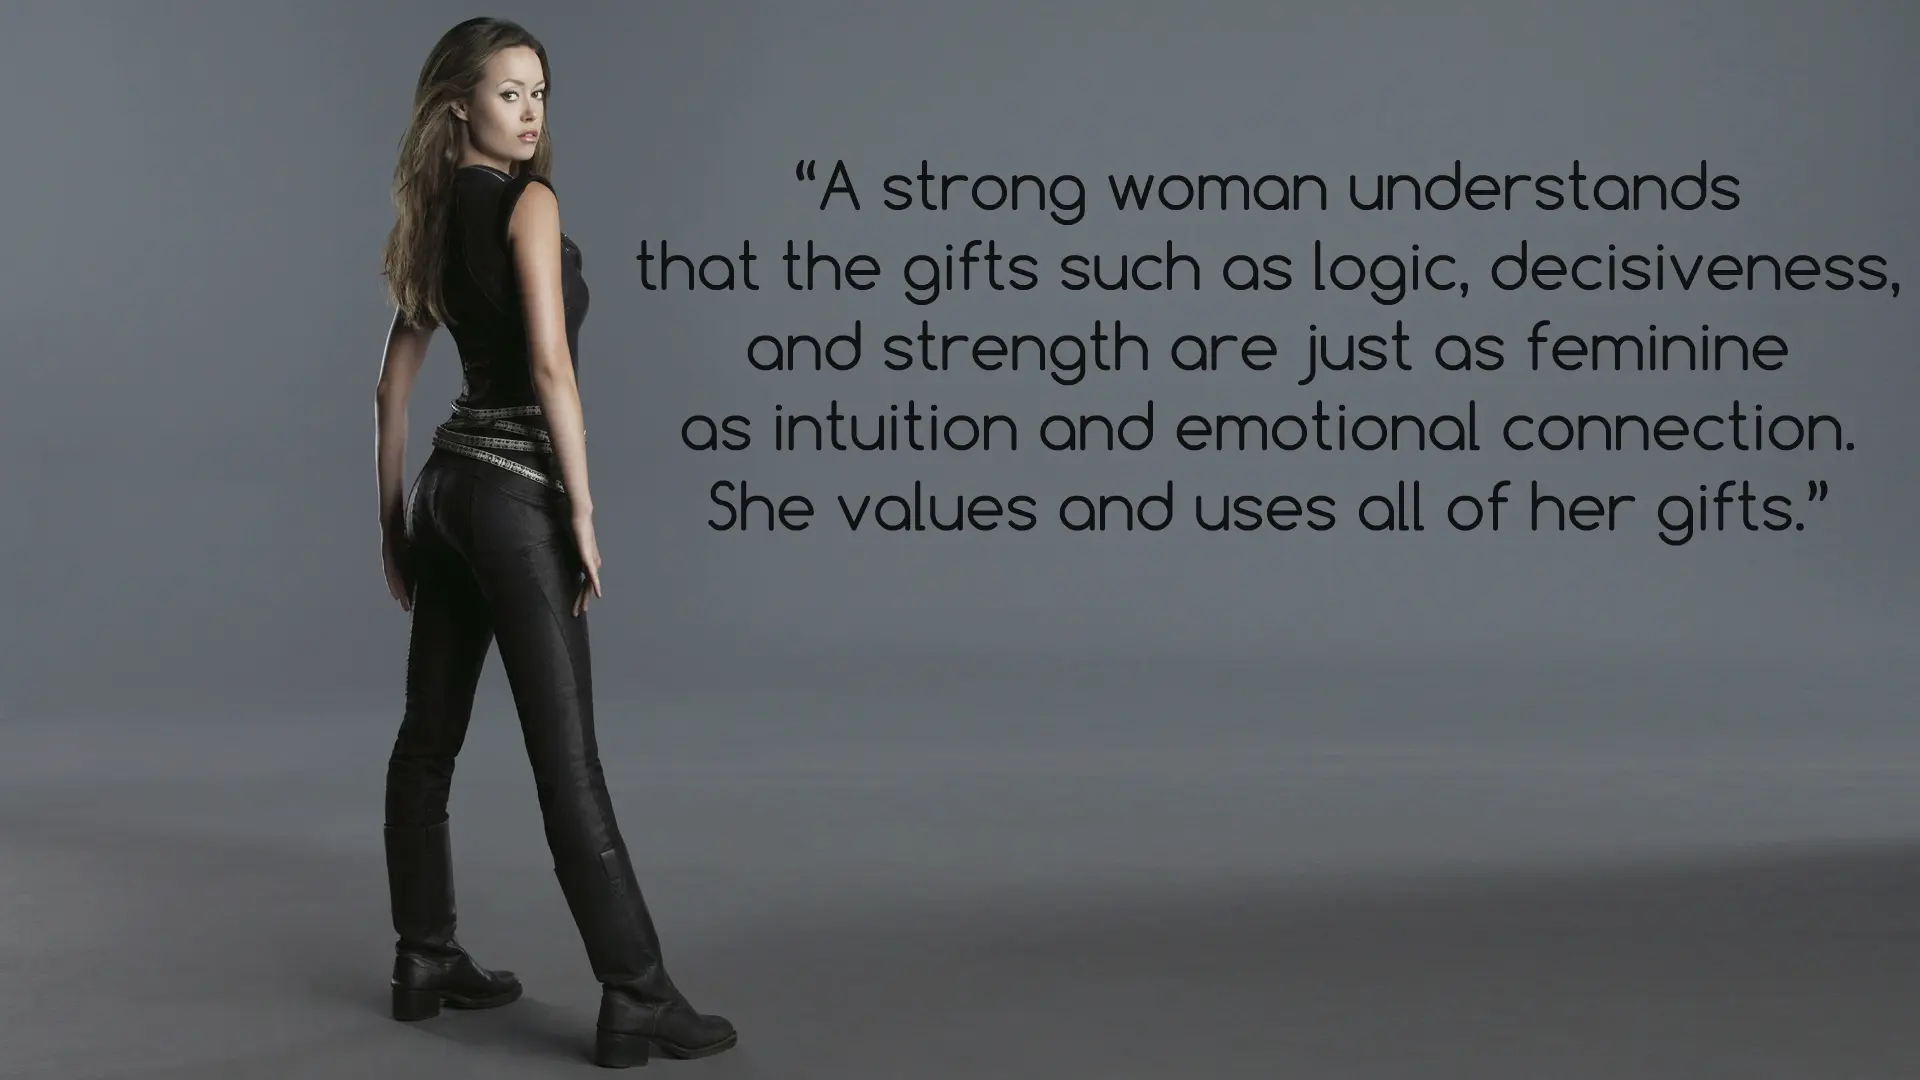 Strong Woman Captioned Image starring Summer Glau: “A strong woman understands that the gifts such as logic, decisiveness, and strength, are just as feminine as intuition and emotional connection. She values and uses all of her gifts.”